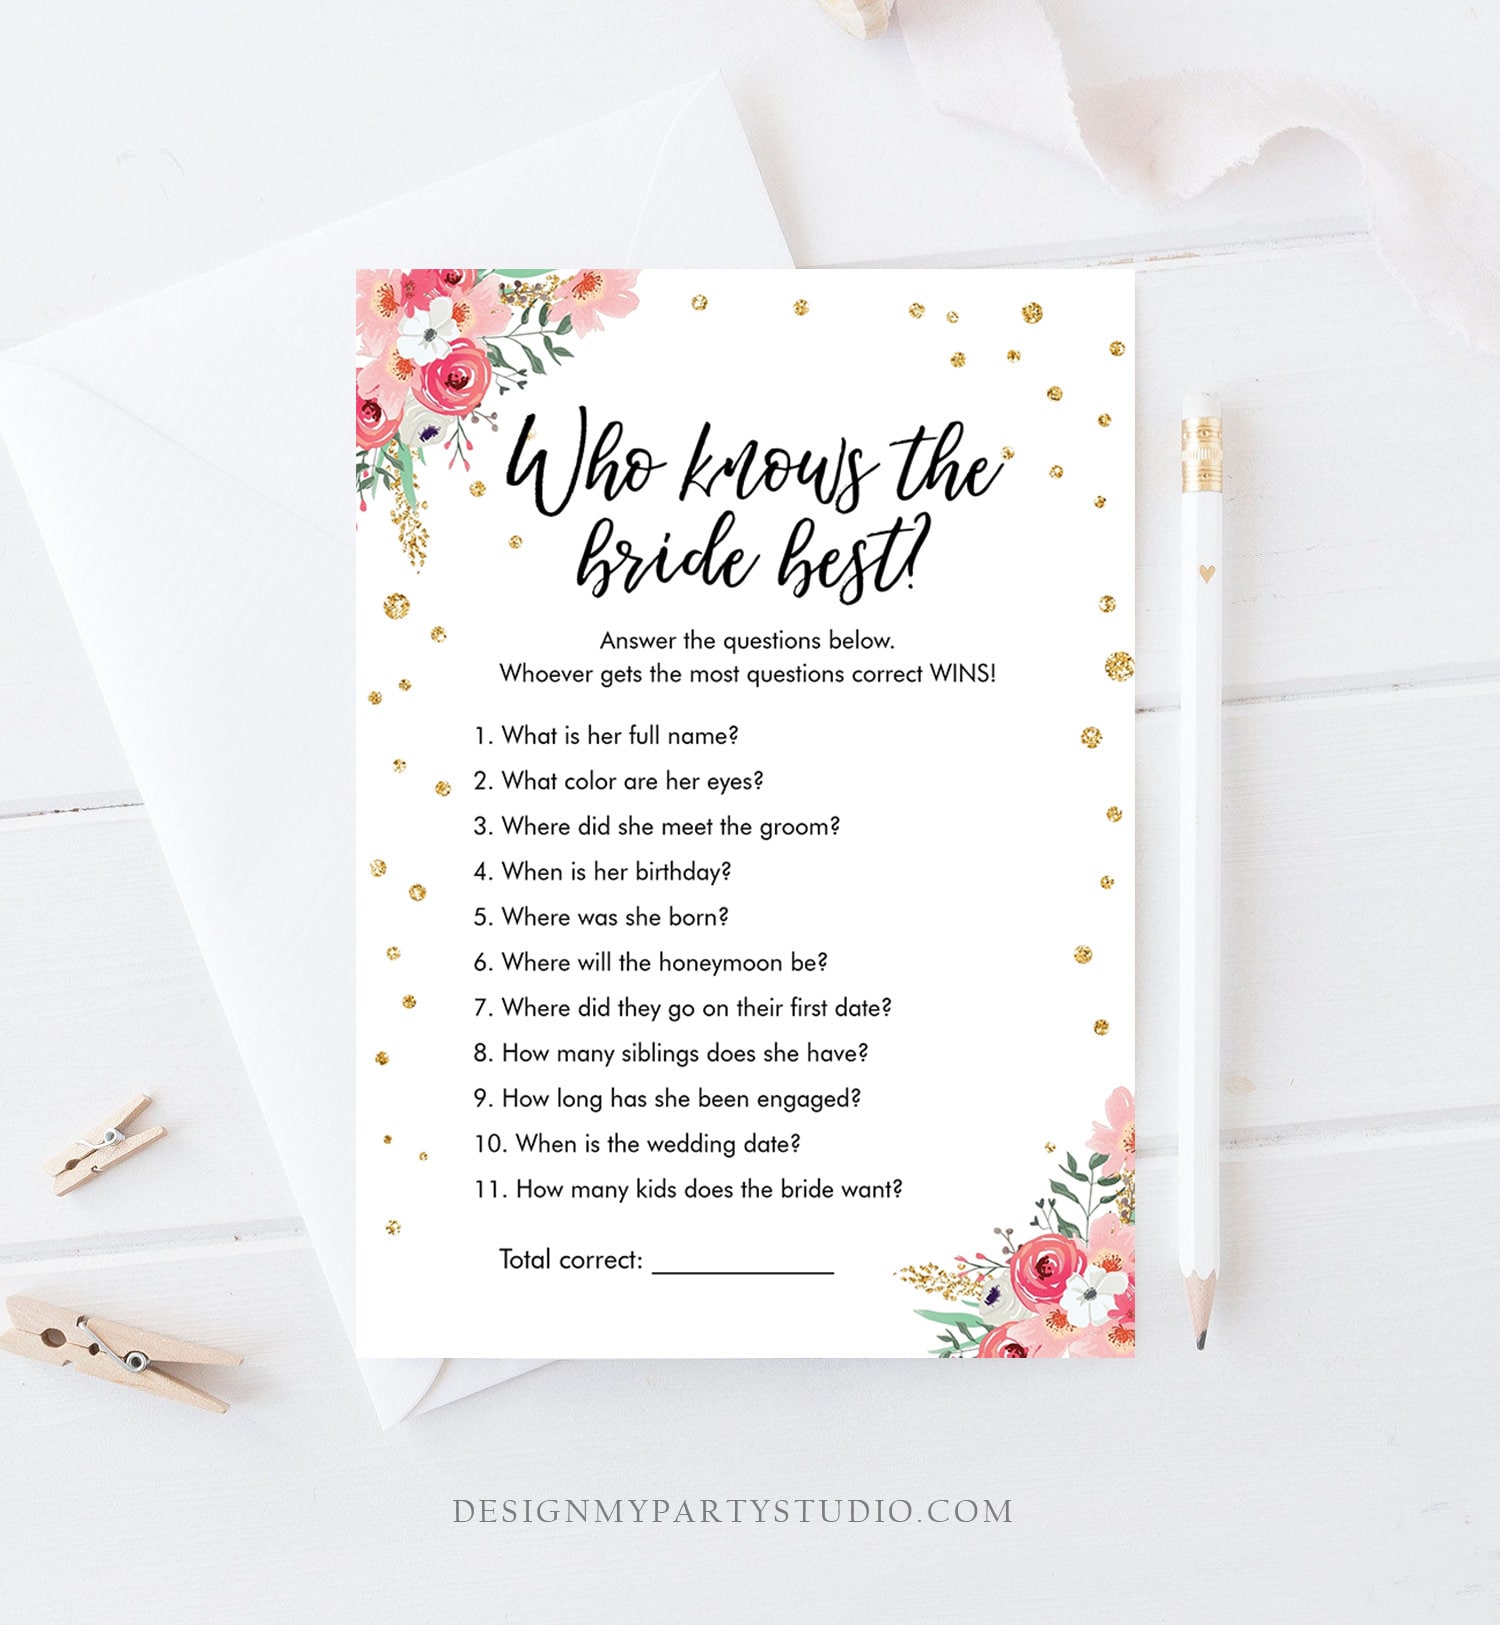 Floral Bridal Shower Games Activities Wedding He Said She Said Advice for Bride 